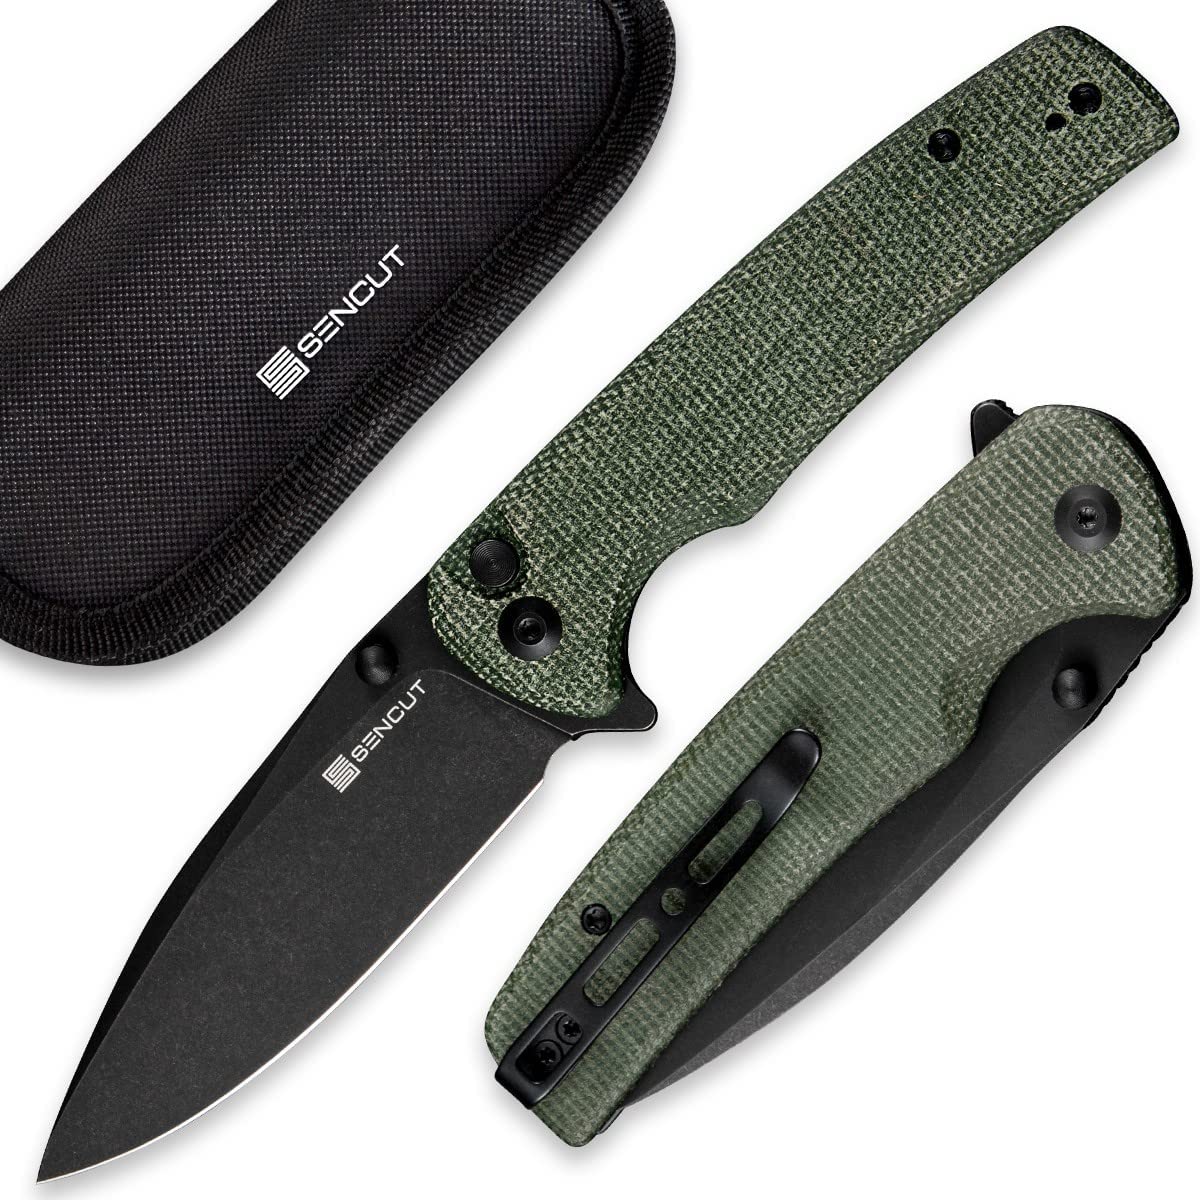 SENCUT Sachse Pocket Knife Folding Knife for EDC, Green Micarta Handle Black Stonewashed 9Cr18MoV Blade Foldable Small Knife with Clip, Button Lock Everyday Carry Knife for Men Women, Lightweight for Indoor Outdoor Gift S21007-2